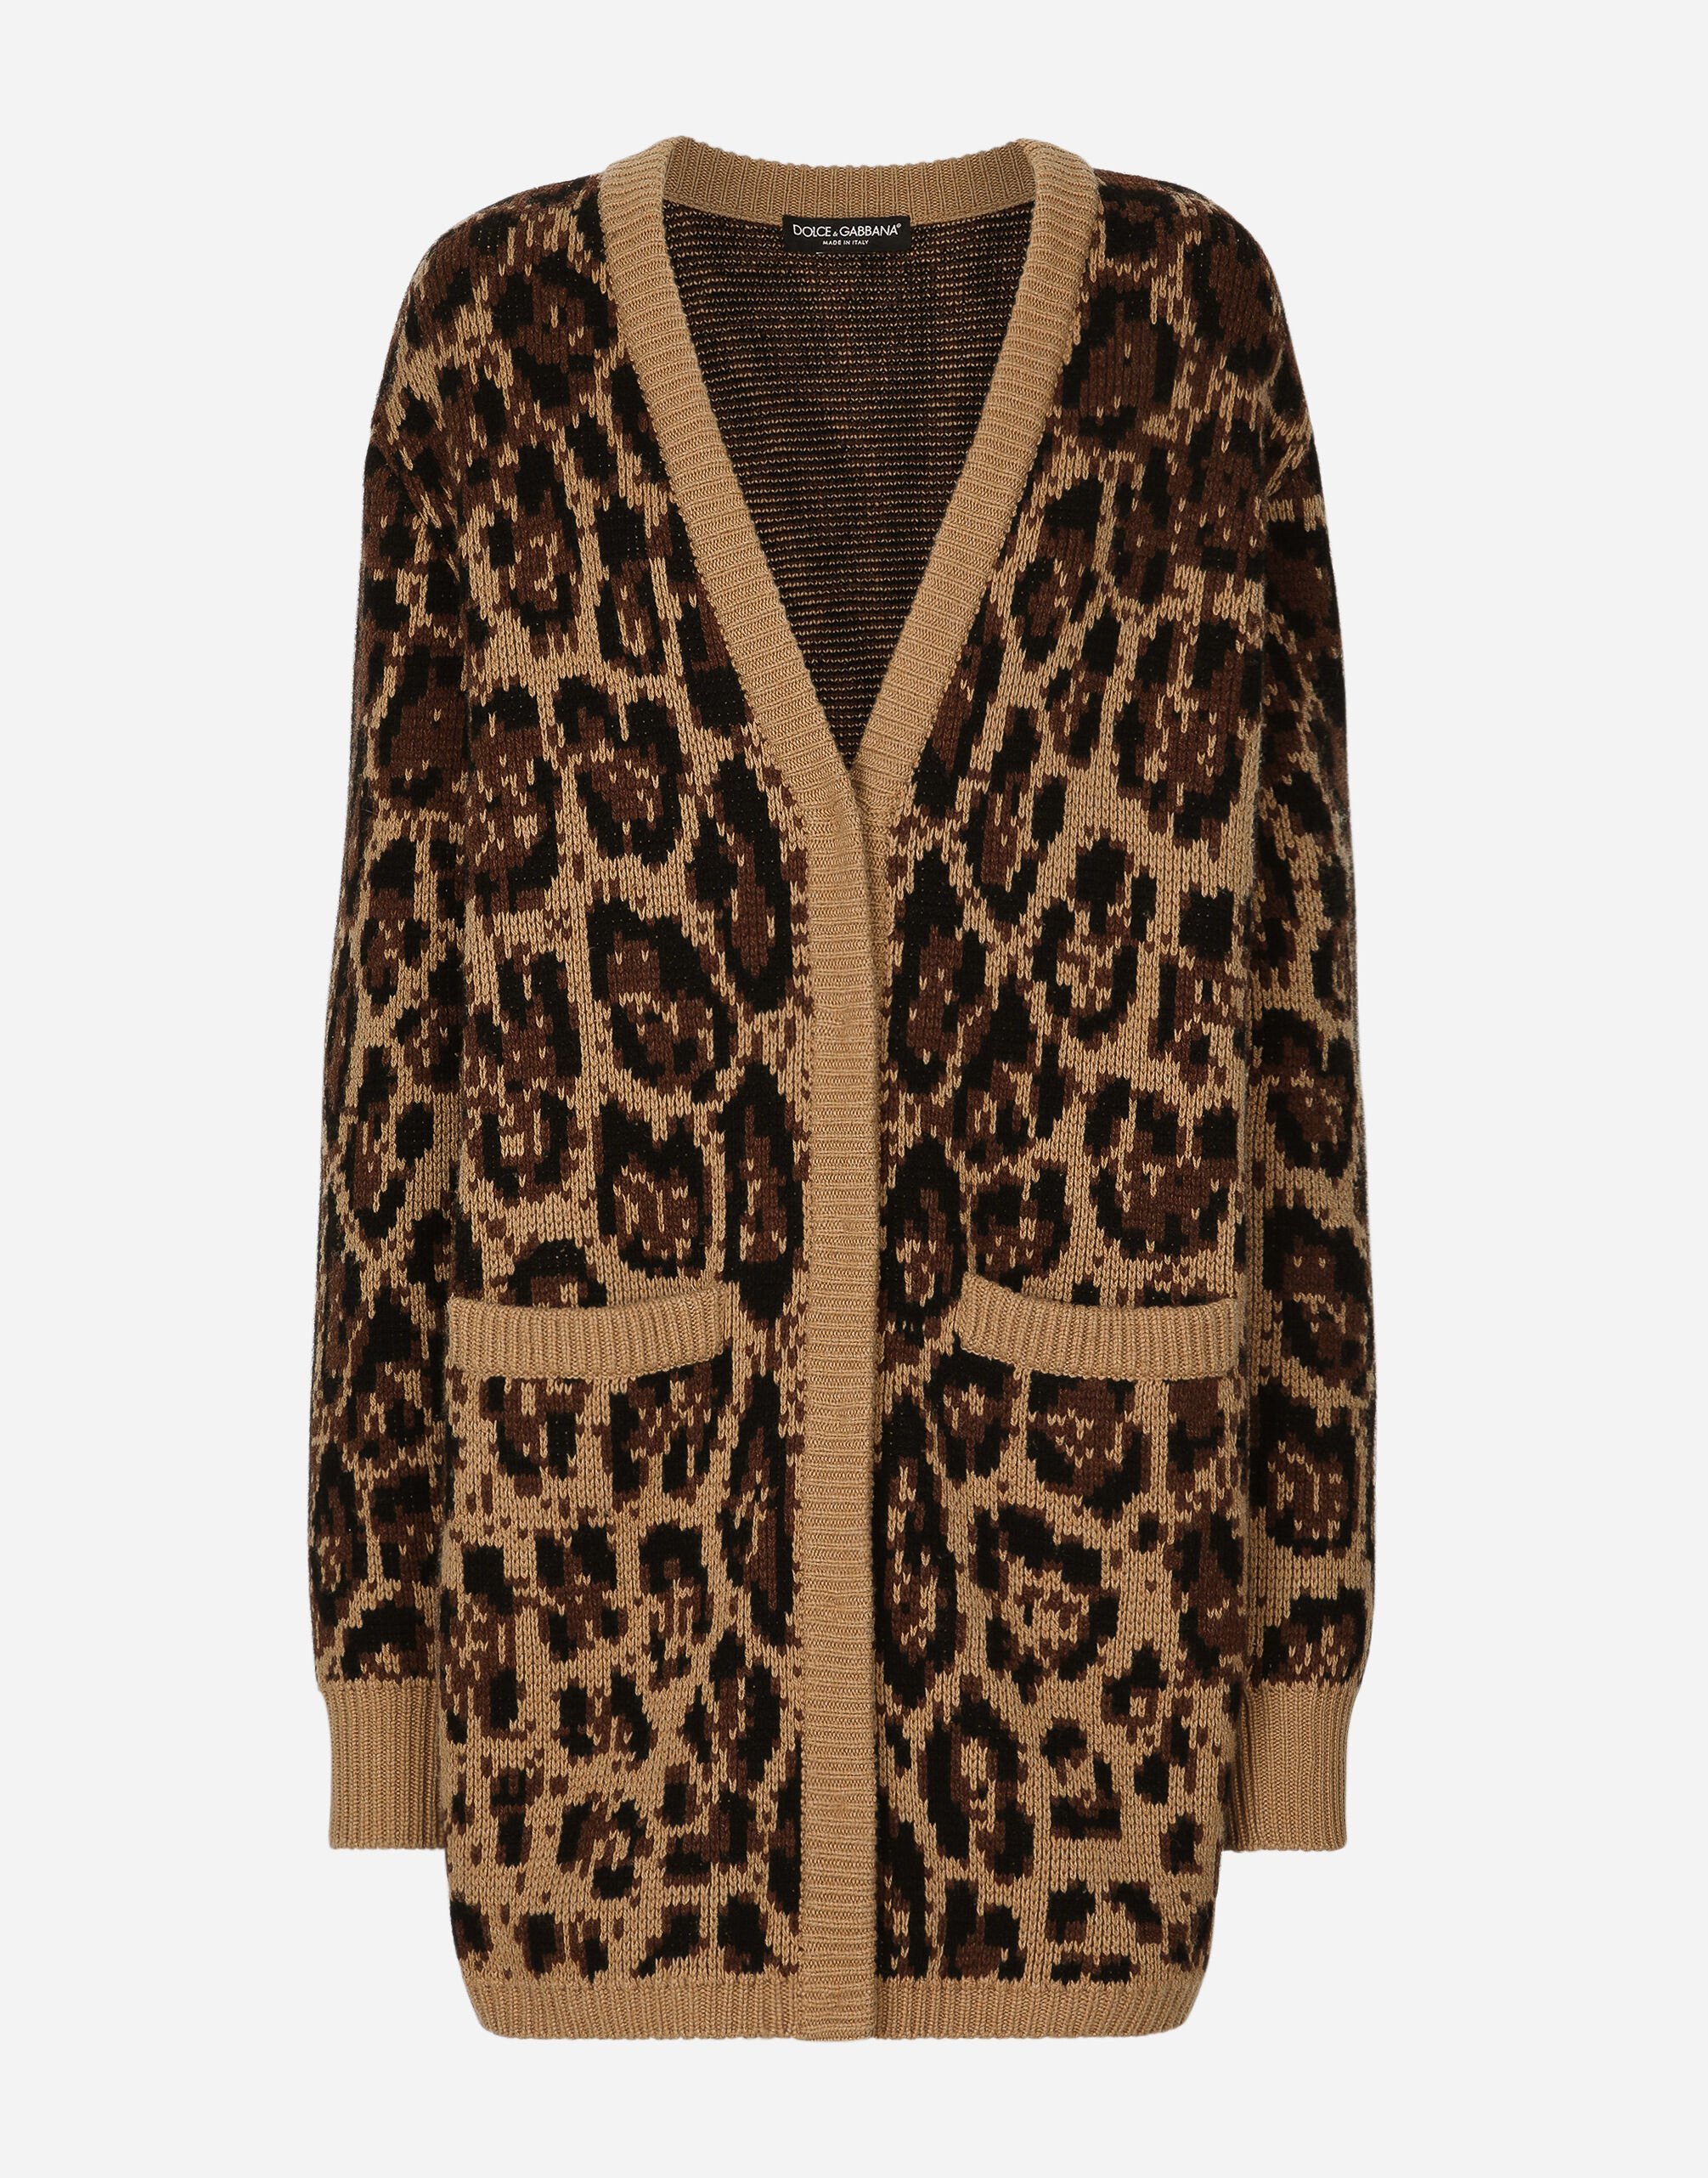 Dolce & Gabbana Long wool and cashmere cardigan with jacquard leopard design Multicolor FXM23TJCVO8